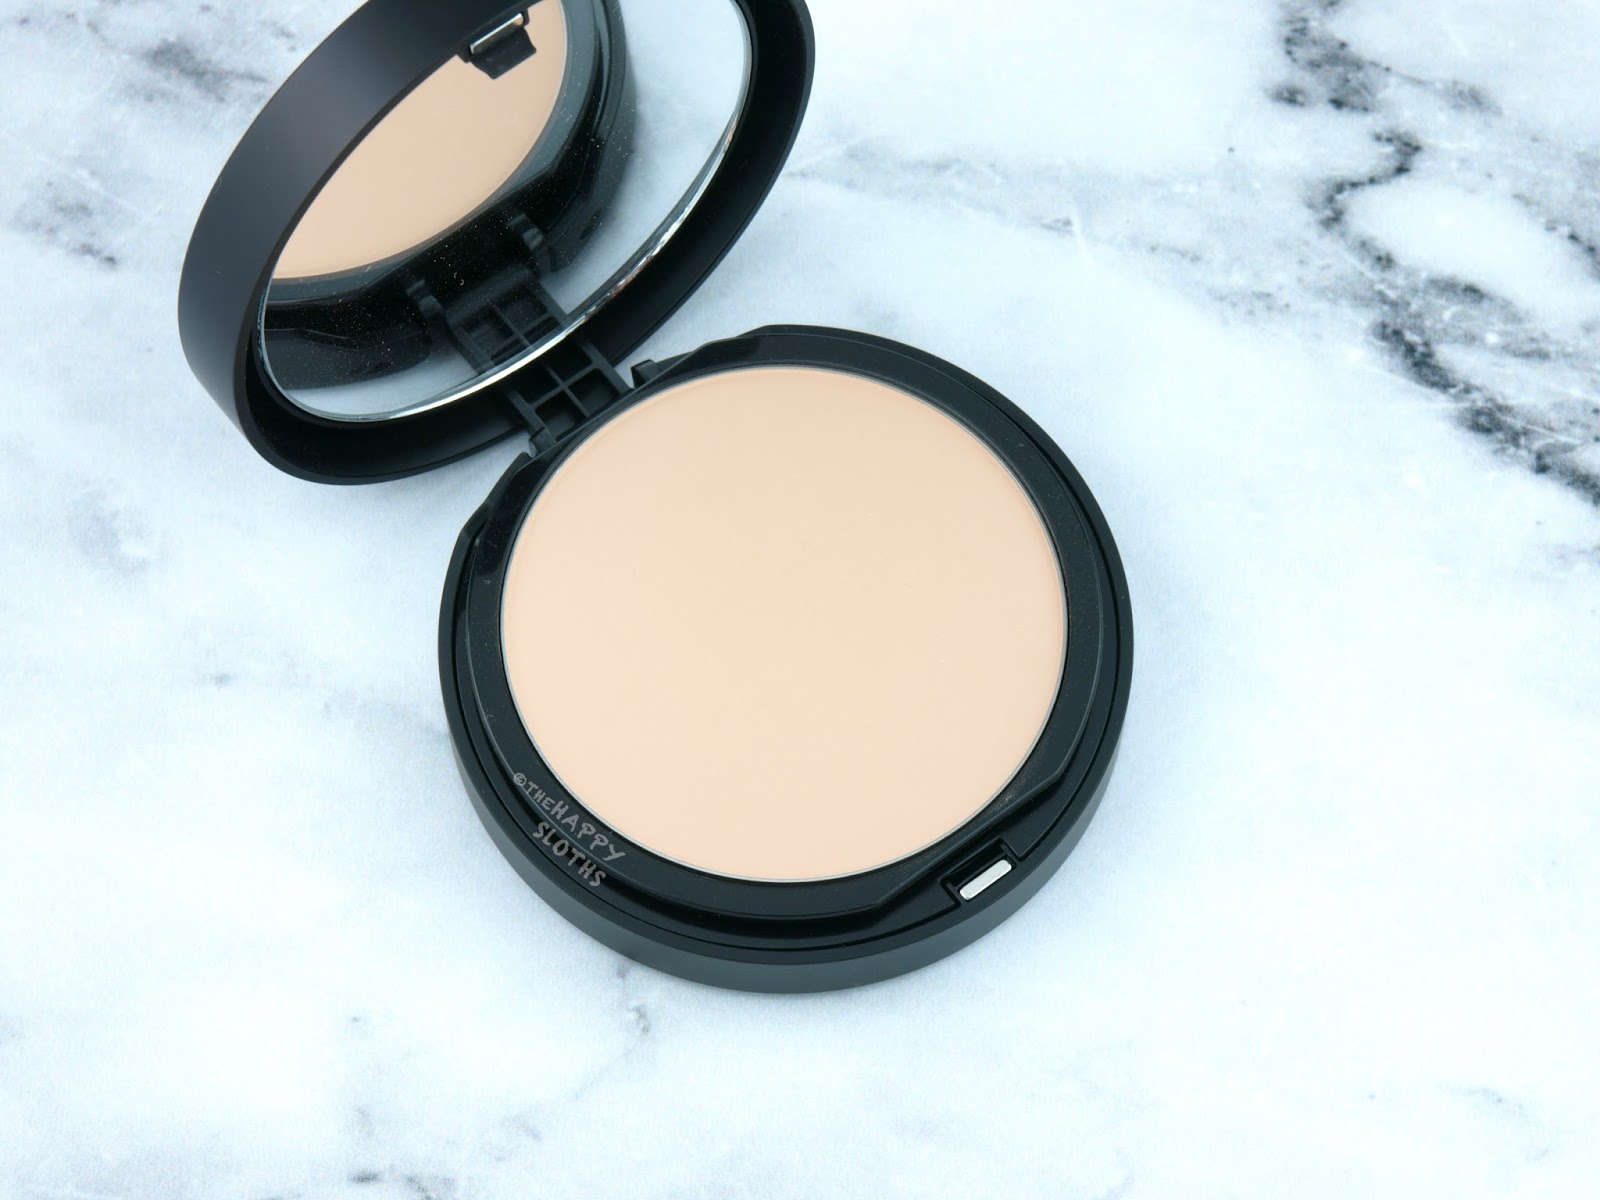 bareMinerals BAREPRO Performance Wear Powder Foundation "Cashmere 06": Review and Swatches